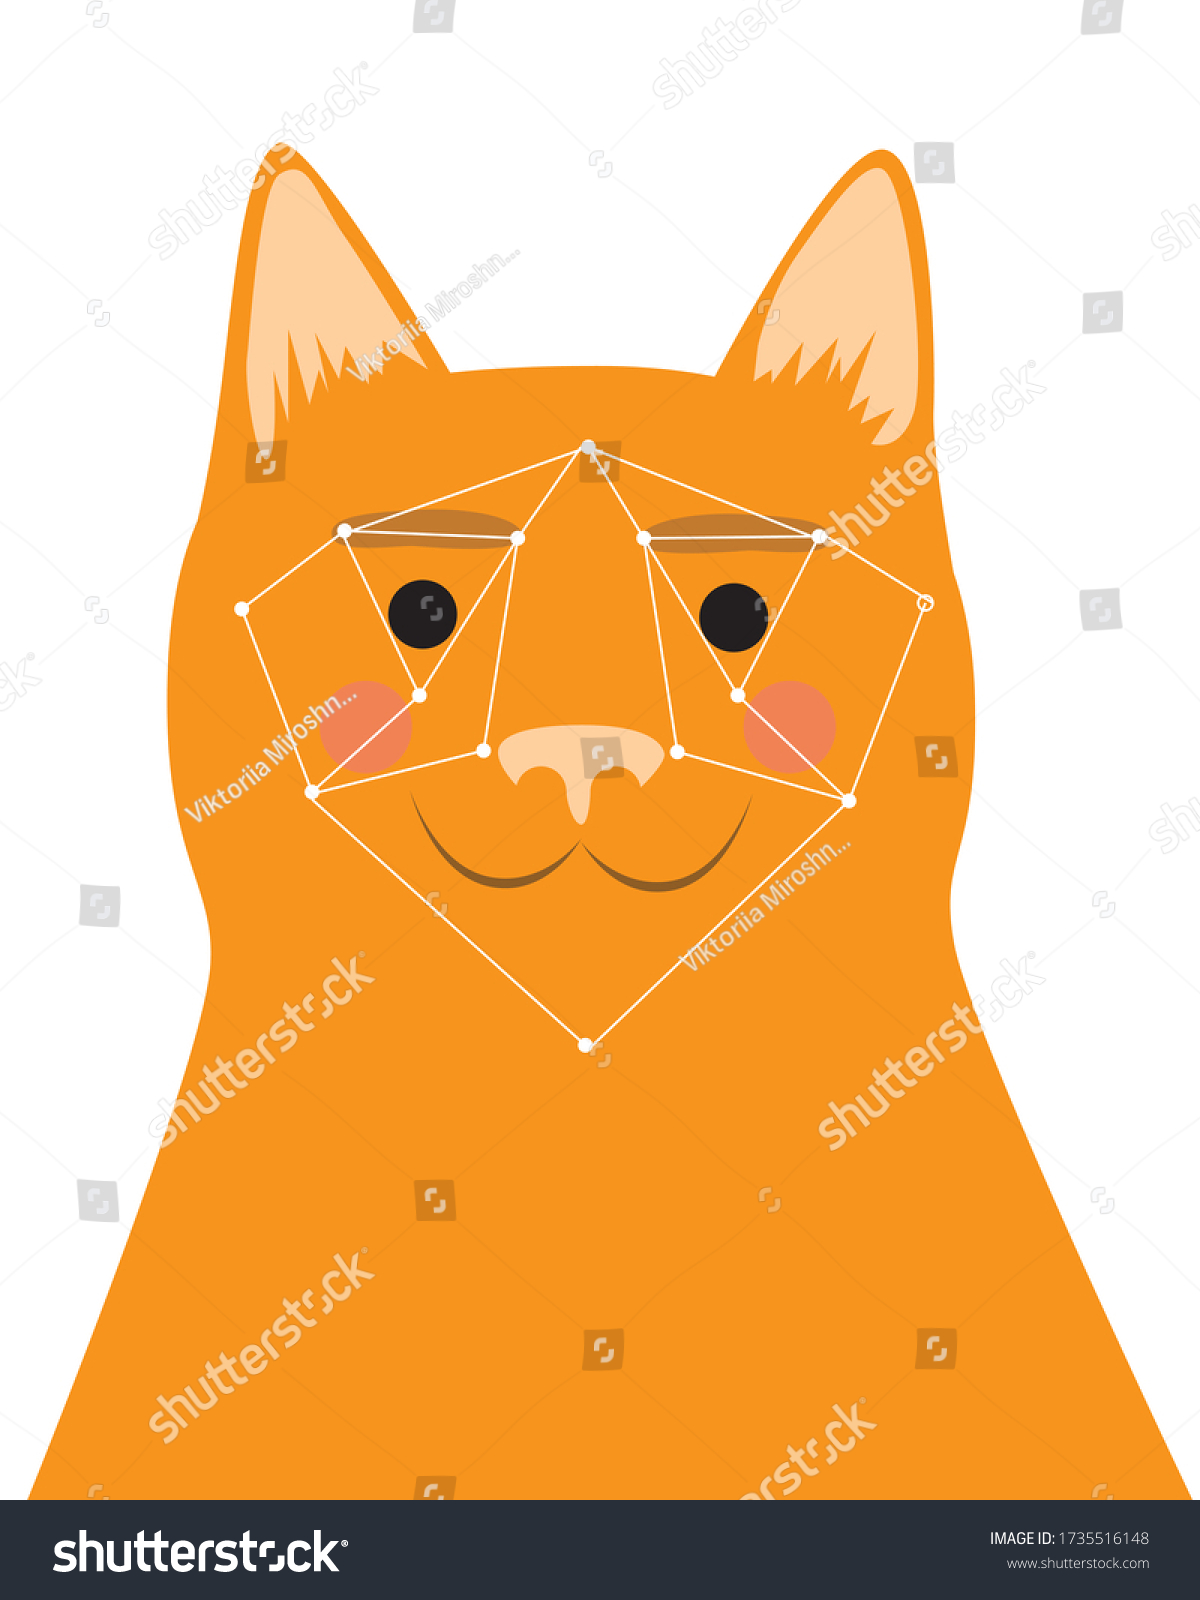 SVG of Recognition of the face of a ginger cat, animal or pet as a concept for the use of digital technology. Stock vector flat illustration with identification of a lost cat for search svg